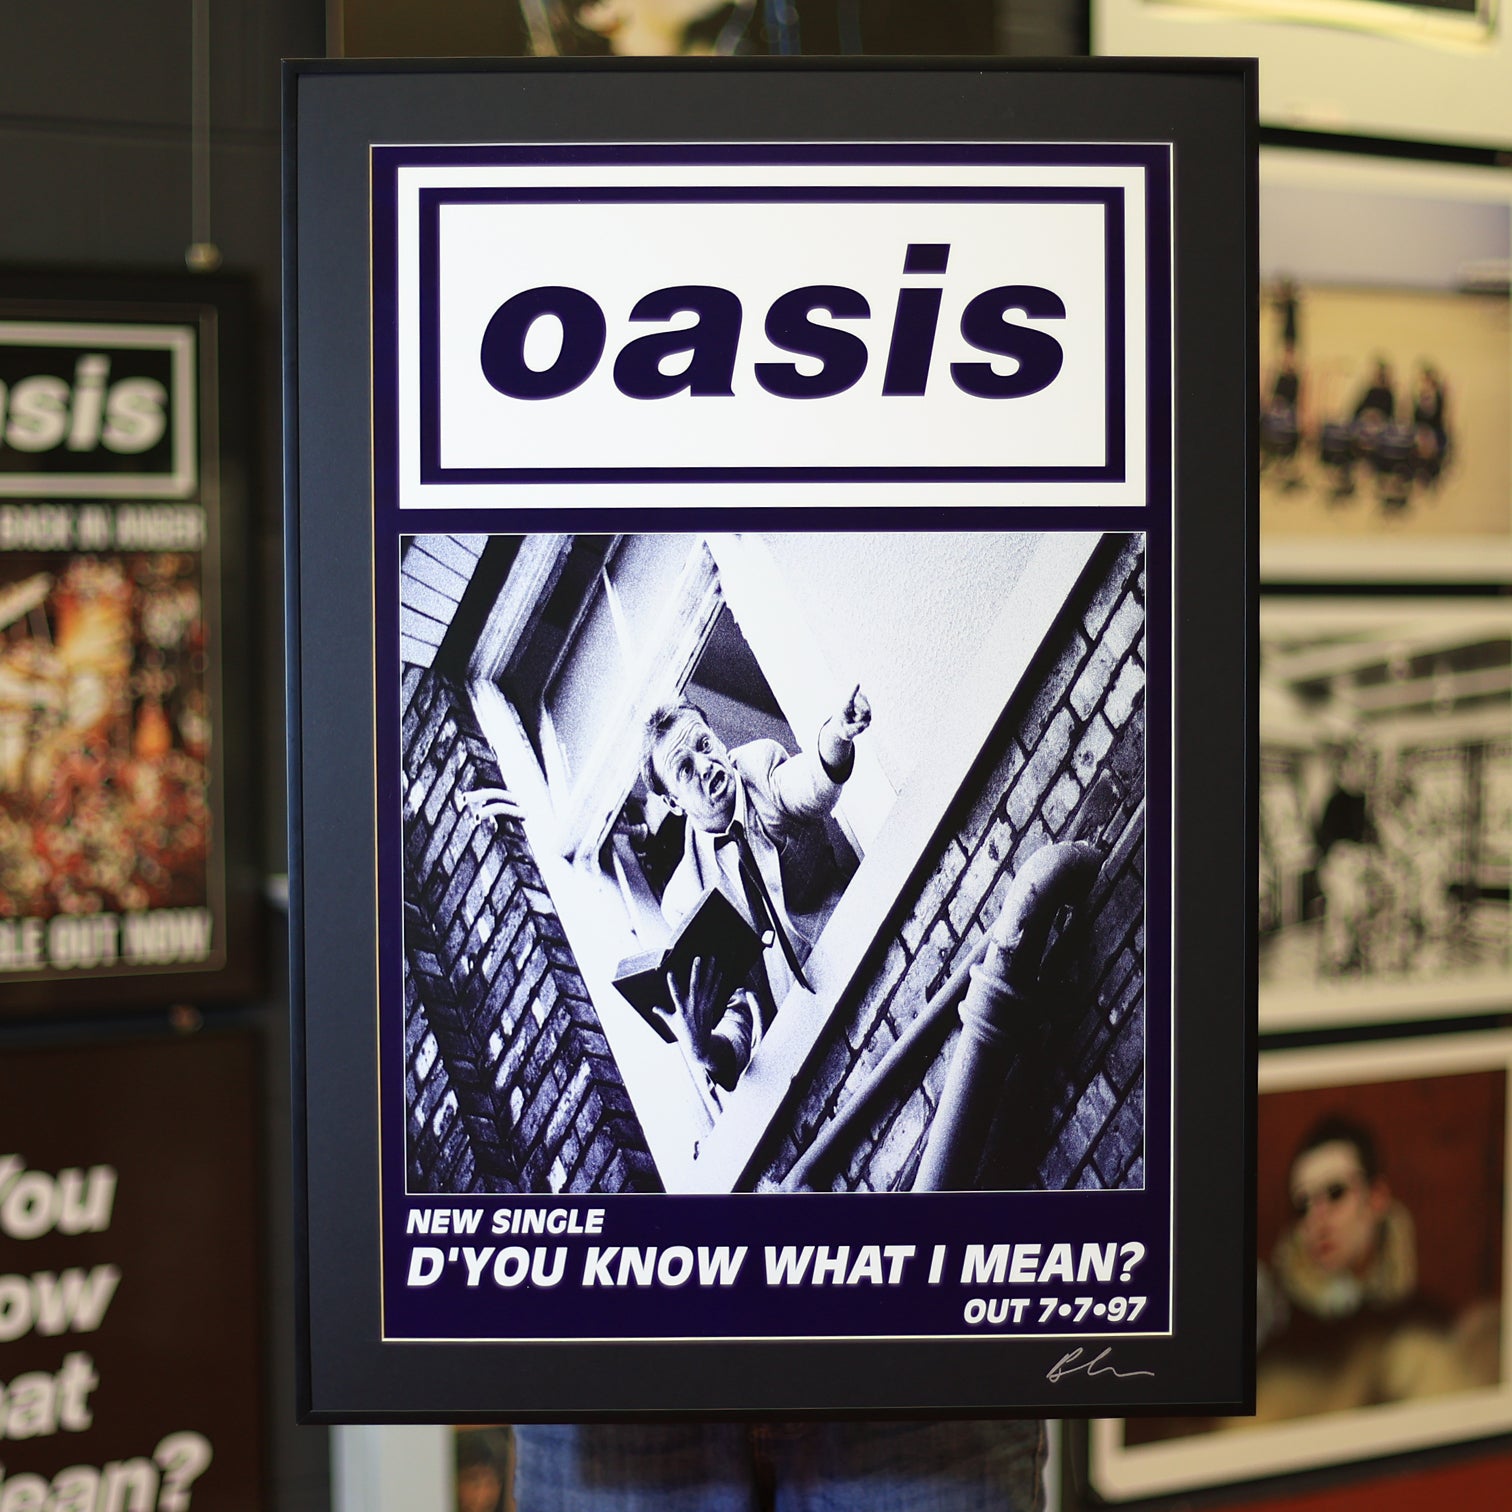 Oasis 'D'You Know What I Mean' 1997 Original Street Flyposter 1